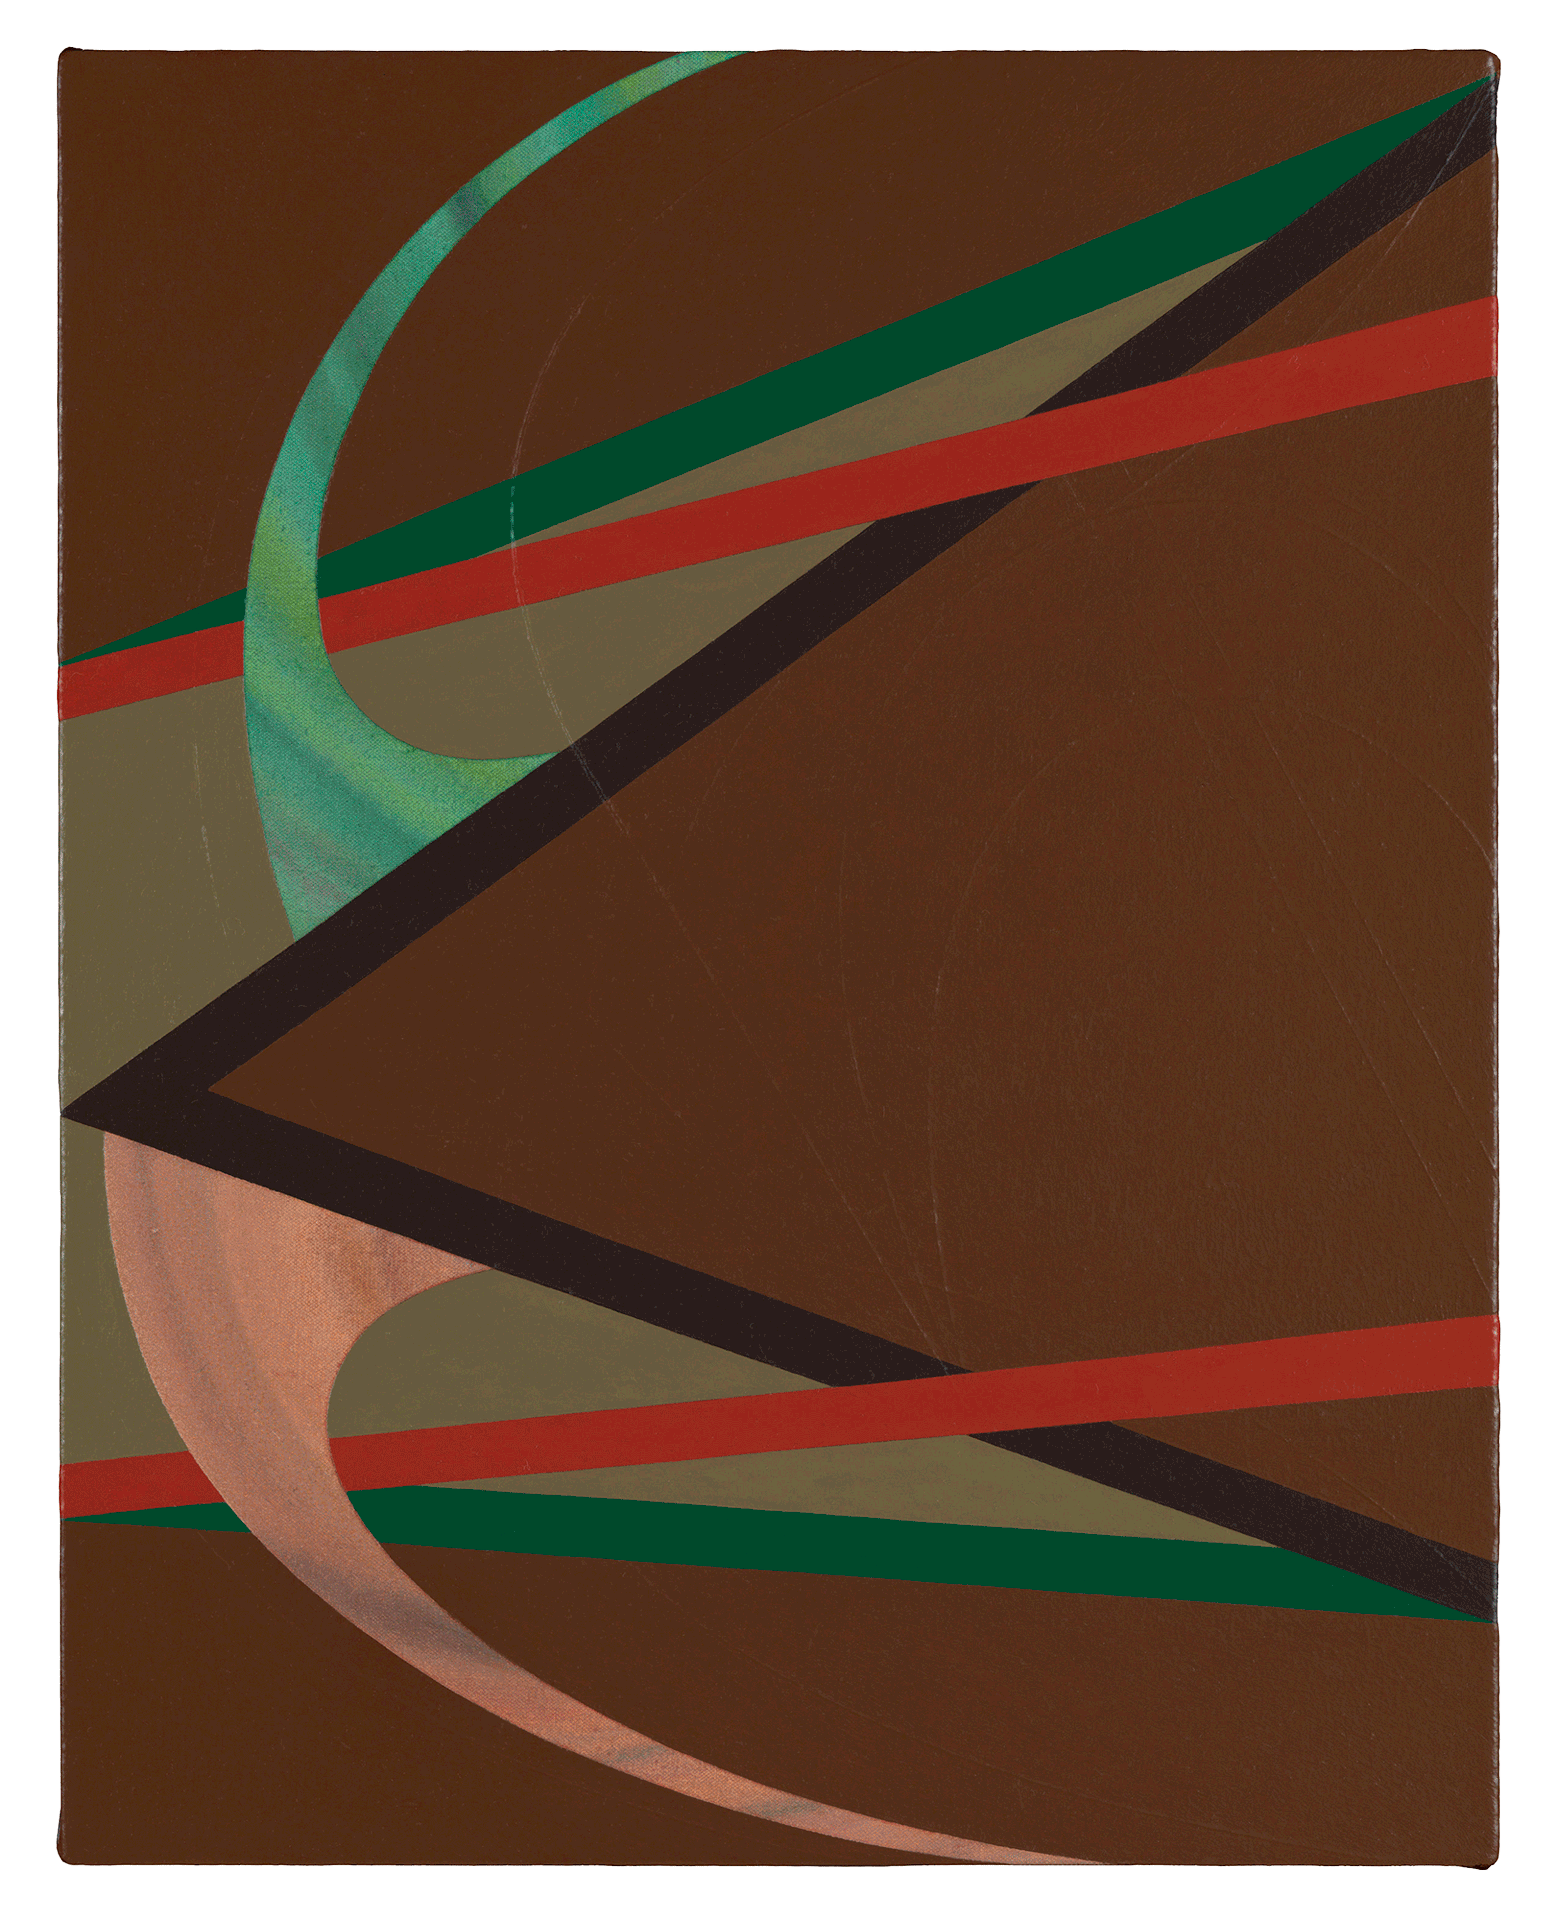 A painting by Tomma Abts, titled Teite, dated 2008.